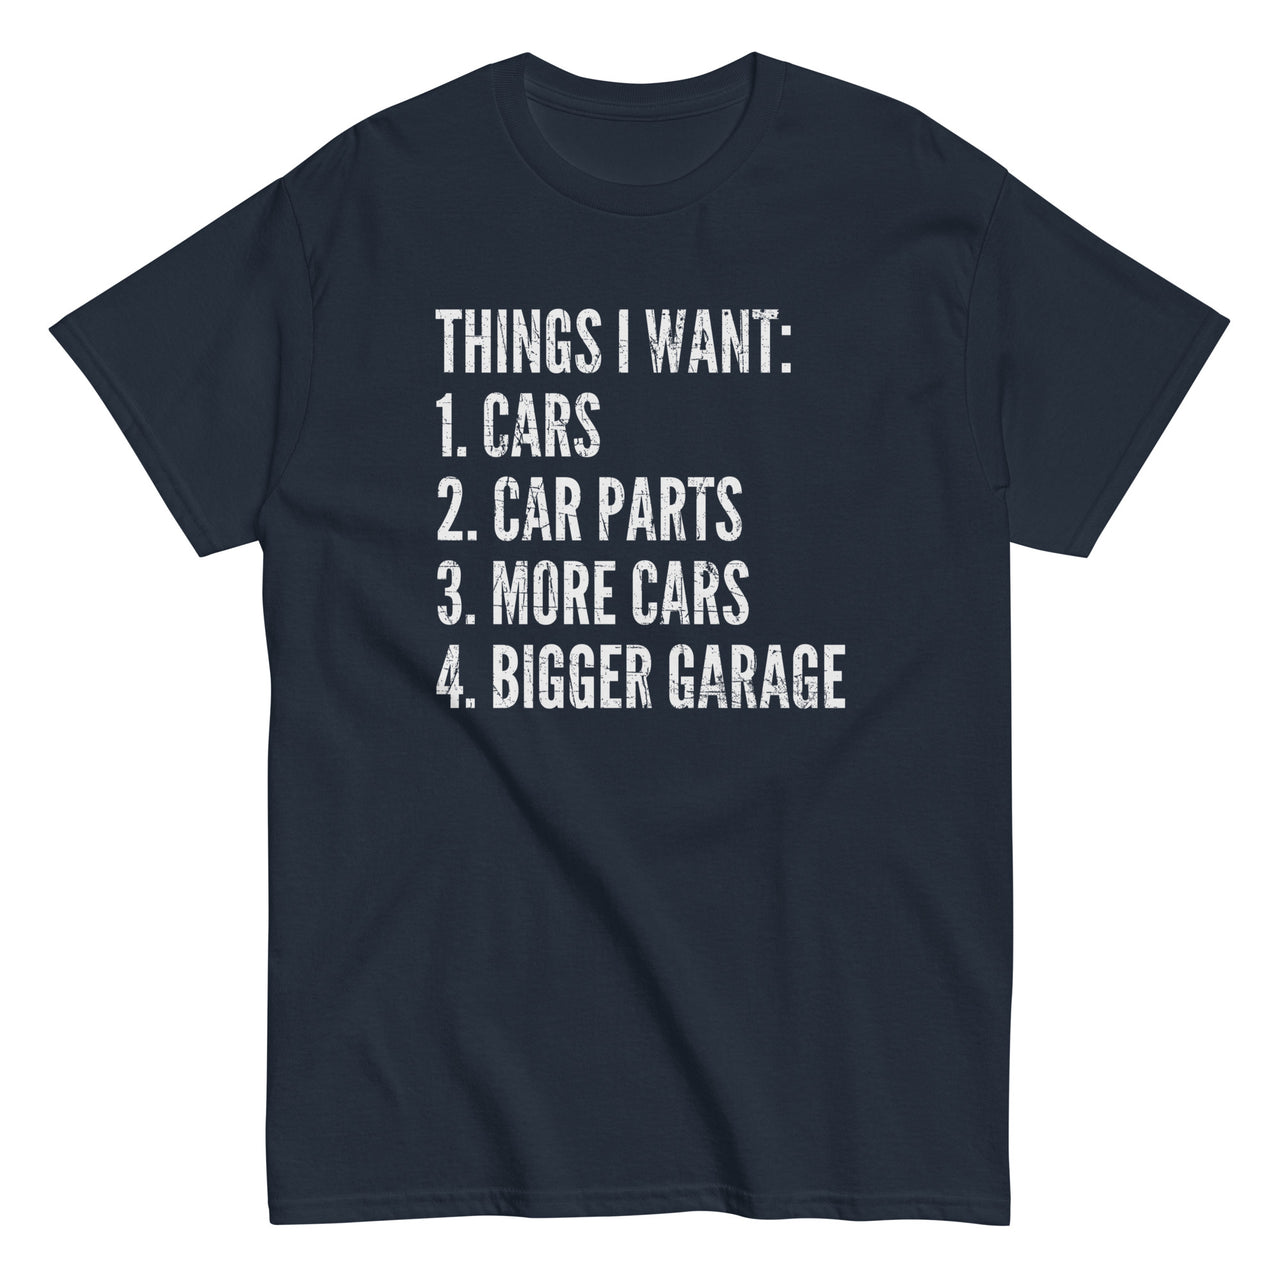 Funny Car Enthusiast T-Shirt Things I Want in navy